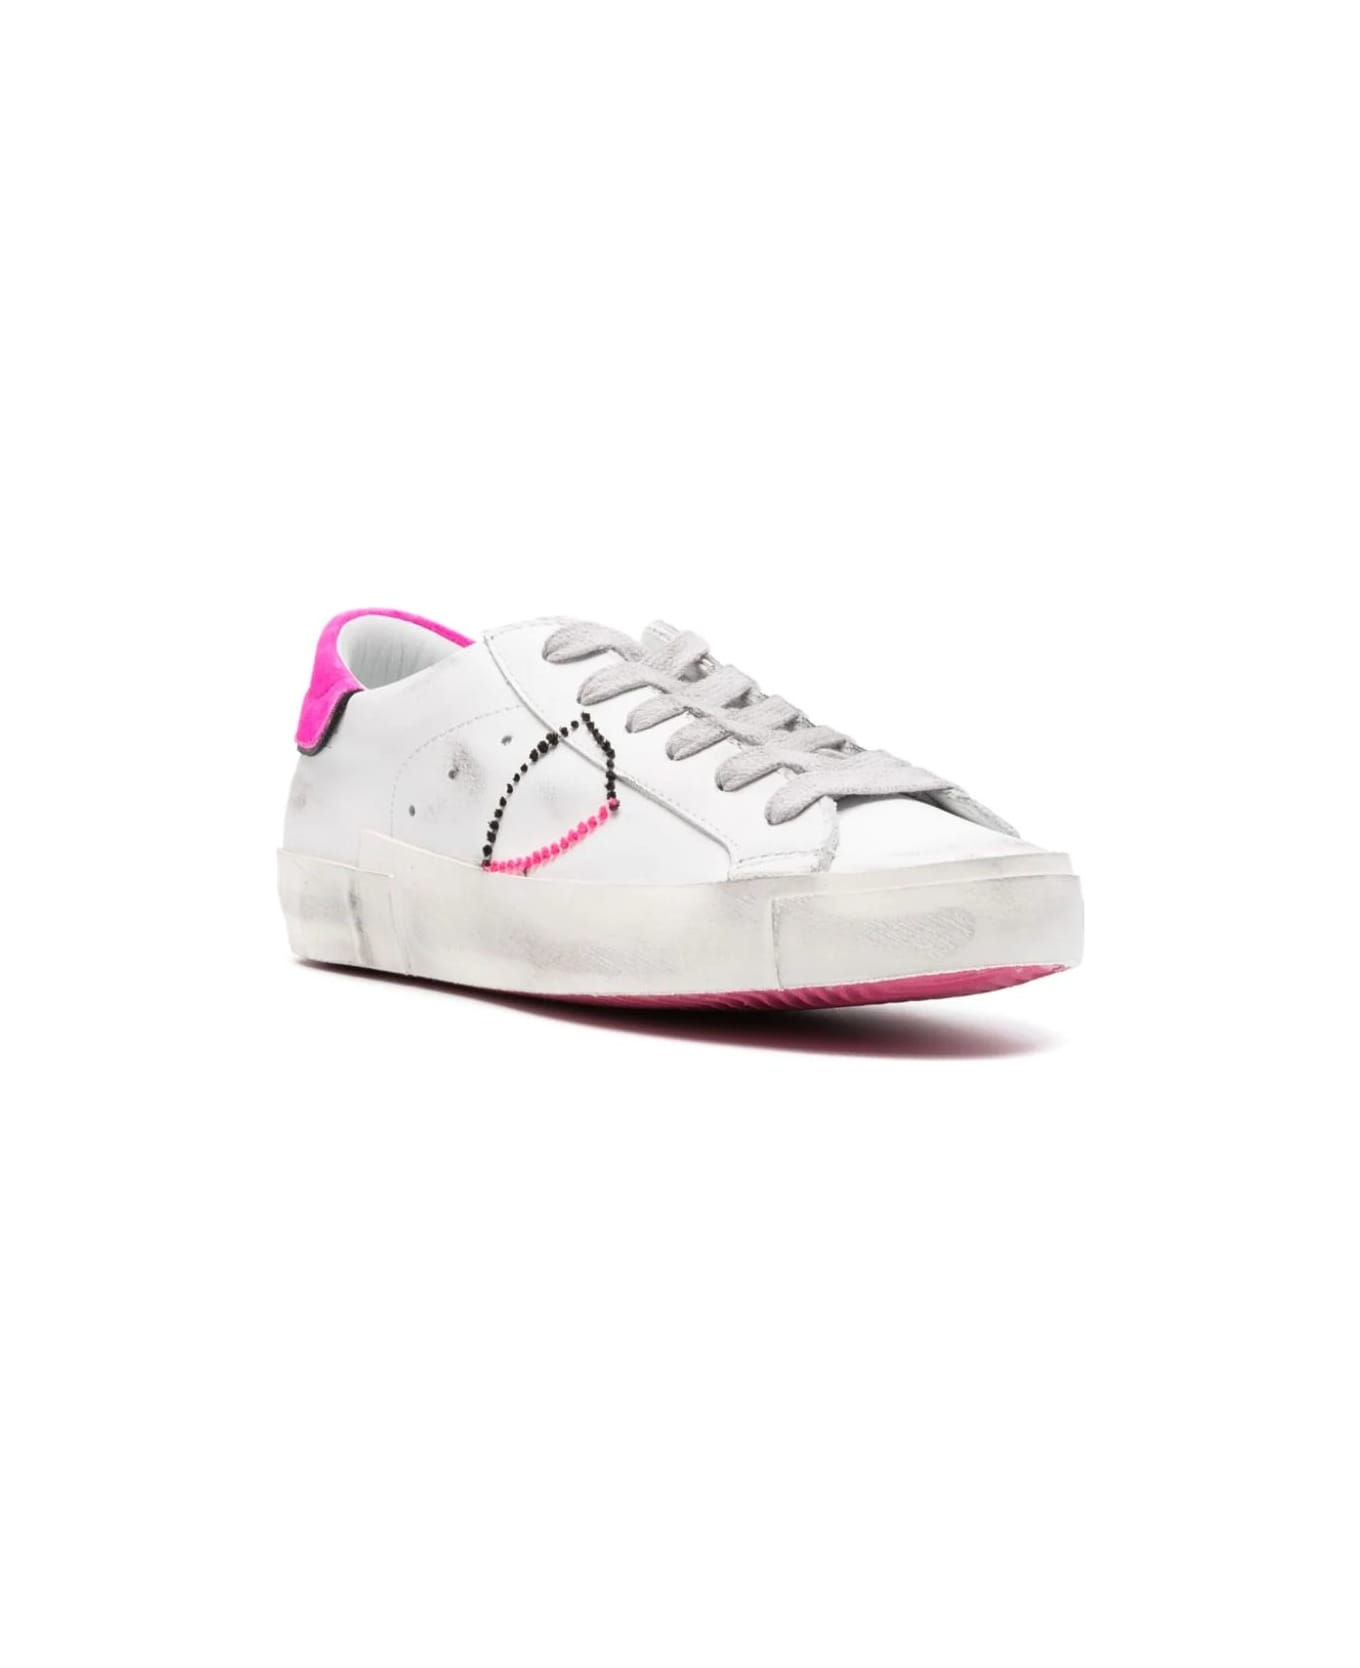 Philippe Model Prsx Low Sneakers - White And Fuchsia - White スニーカー